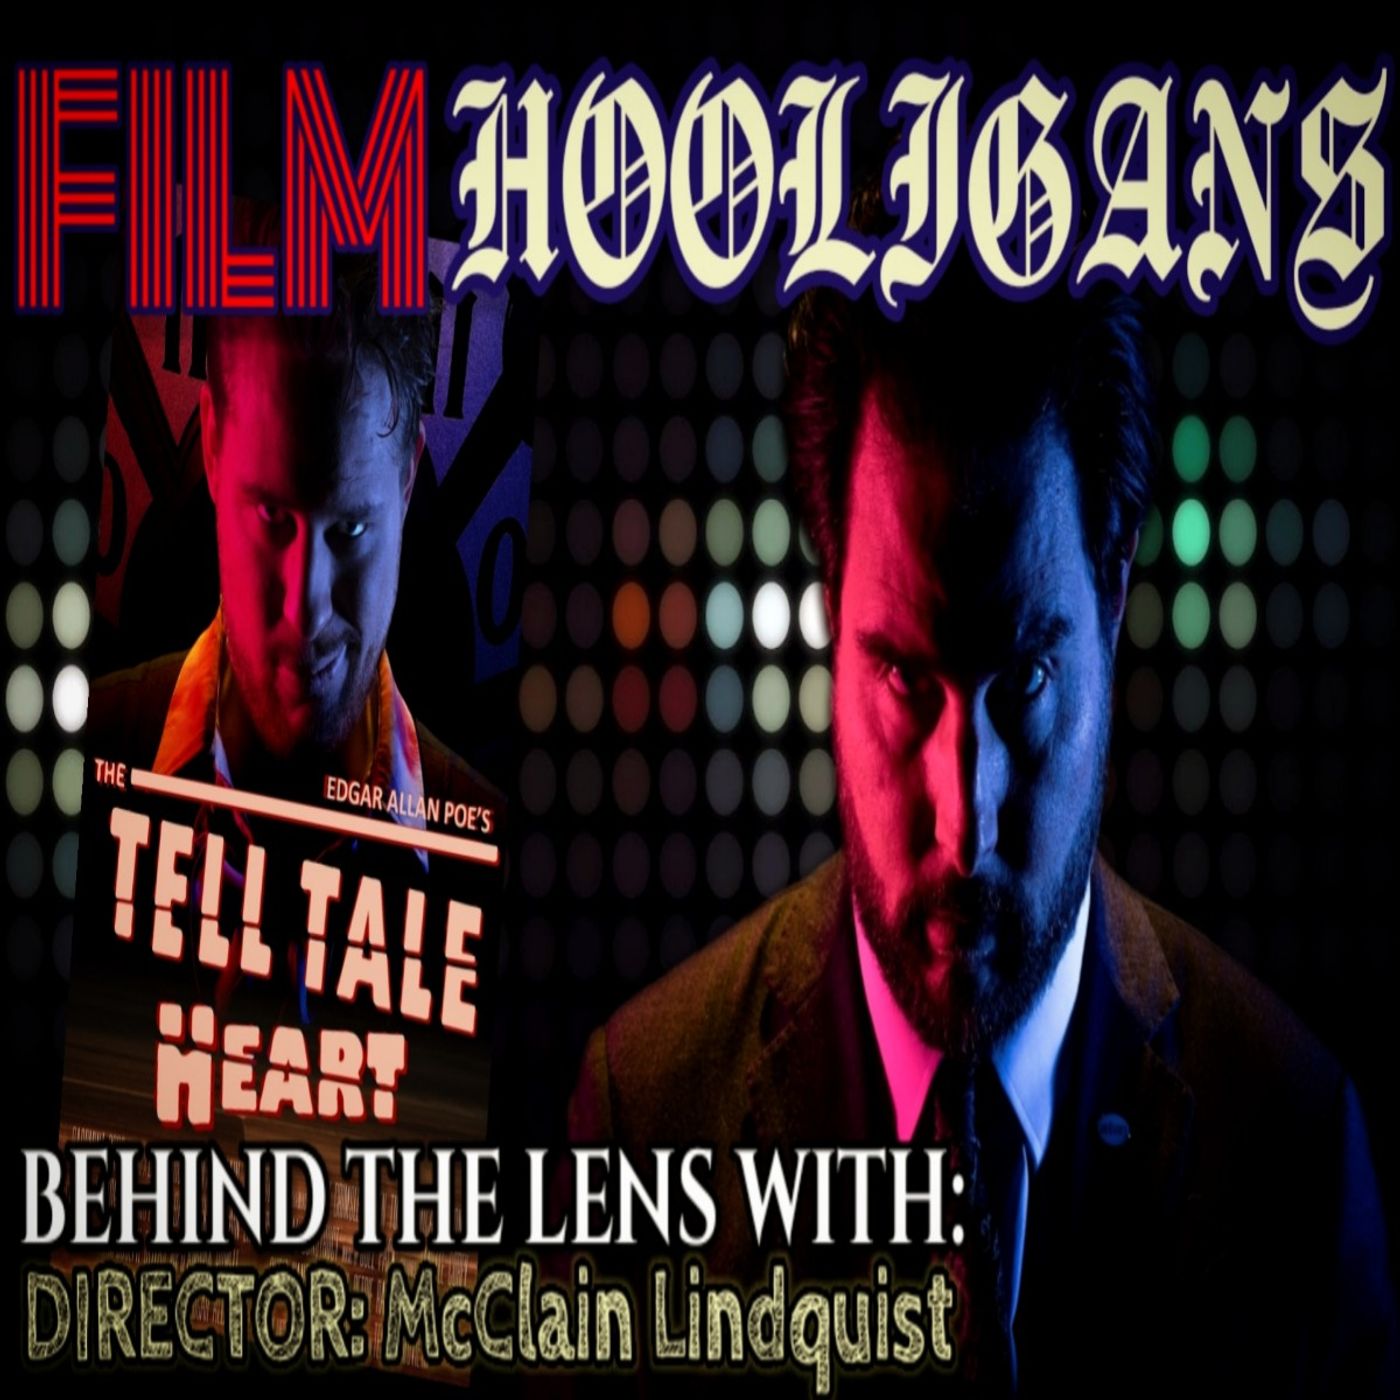 Behind the Lens with McClain Lindquist | Film Hooligans